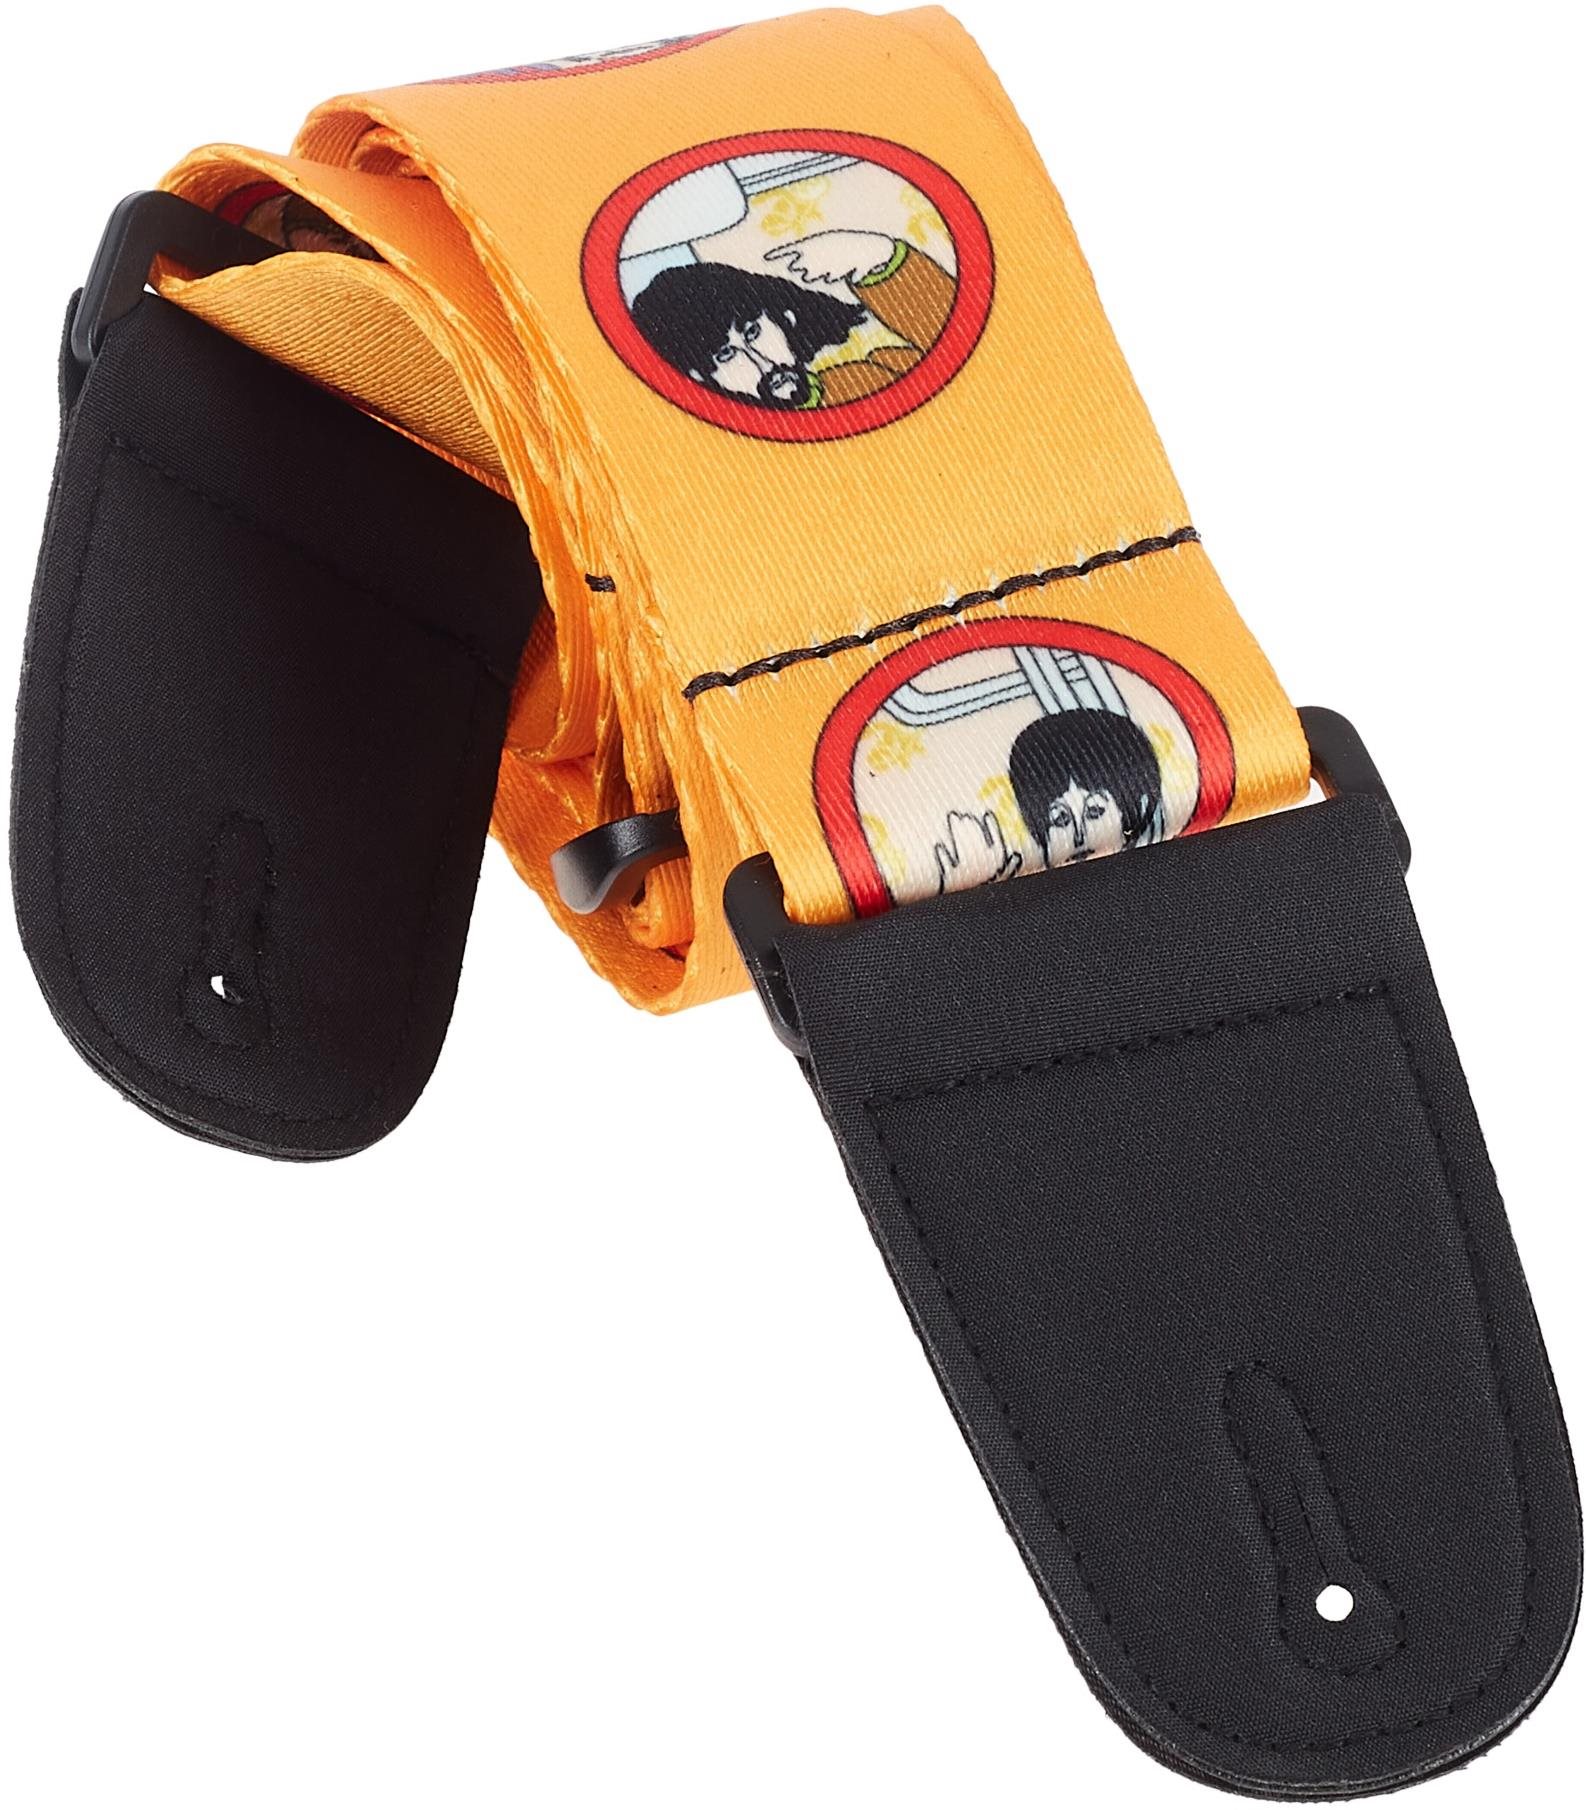 PERRIS LEATHERS 6108 The Beatles Yellow Submarine Strap